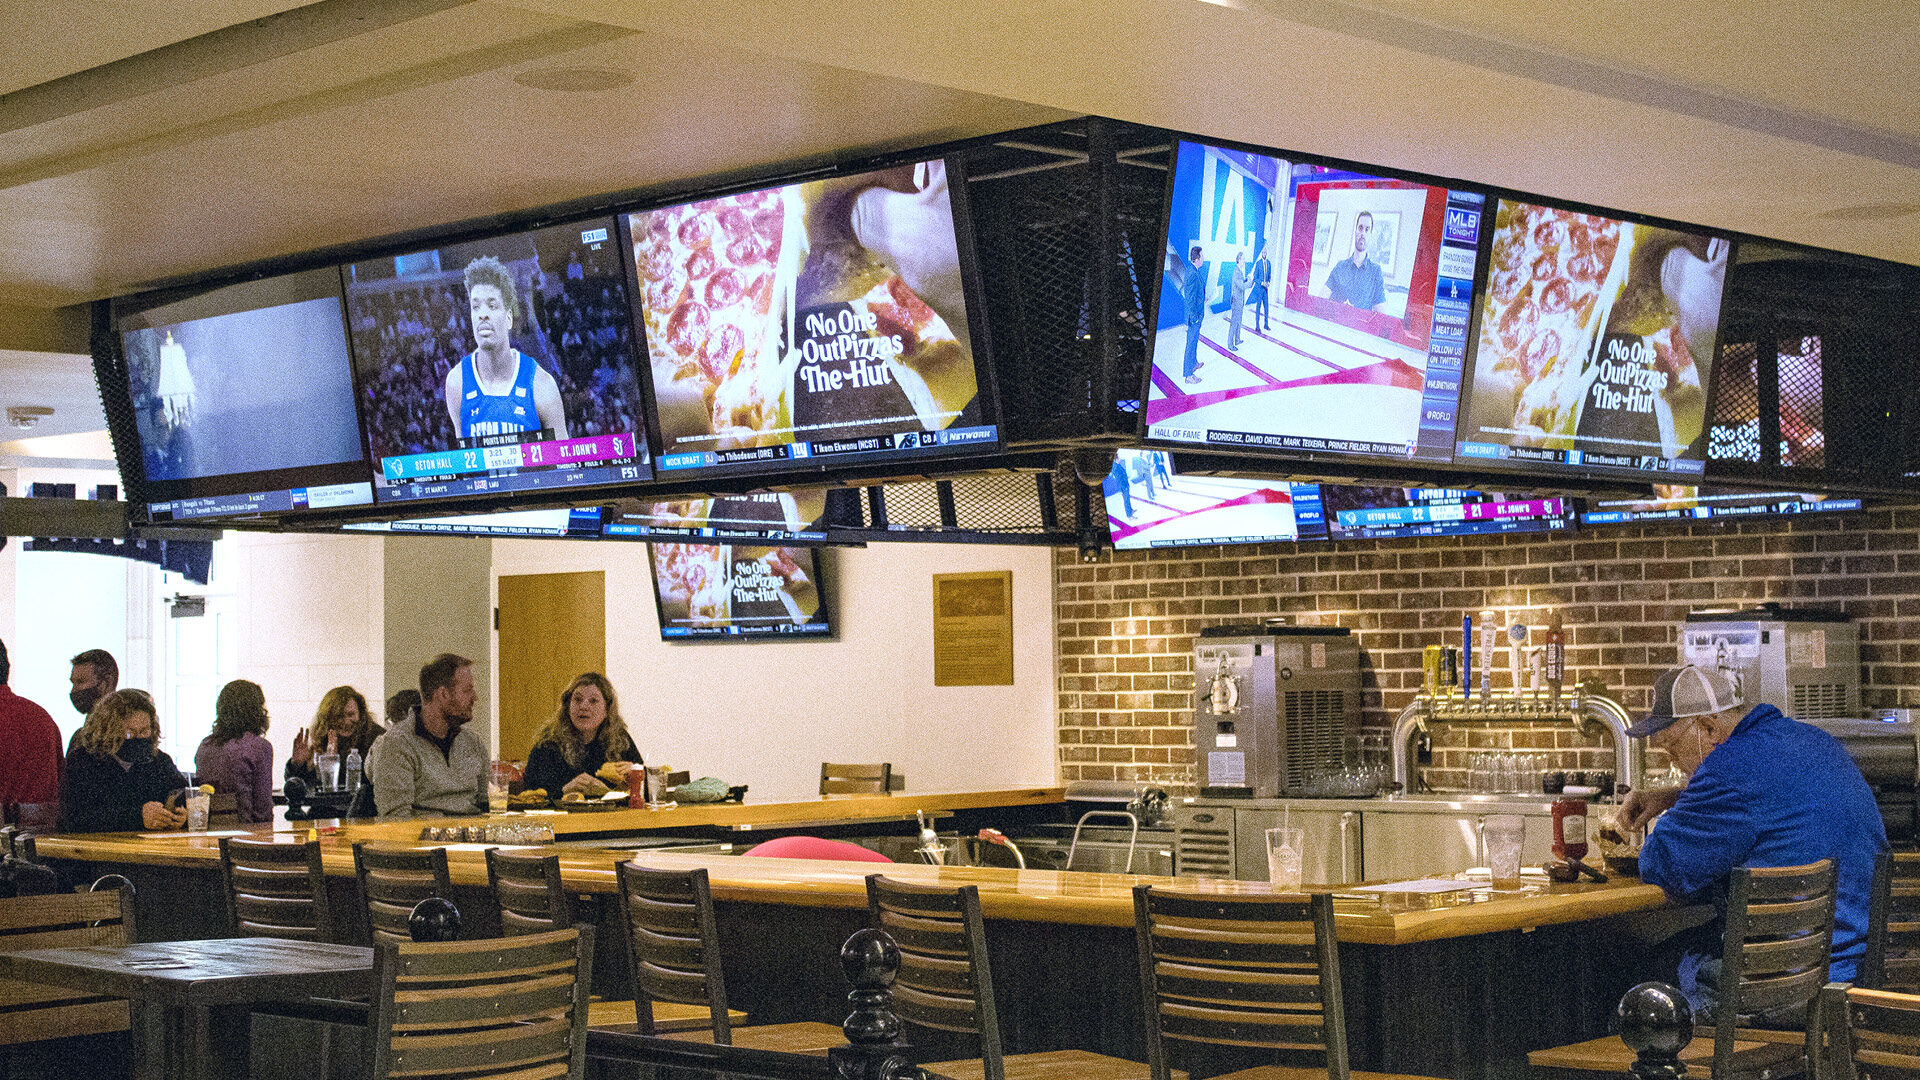 Walk-On’s Sports Bistreaux has 55 TVs available to watch live sports